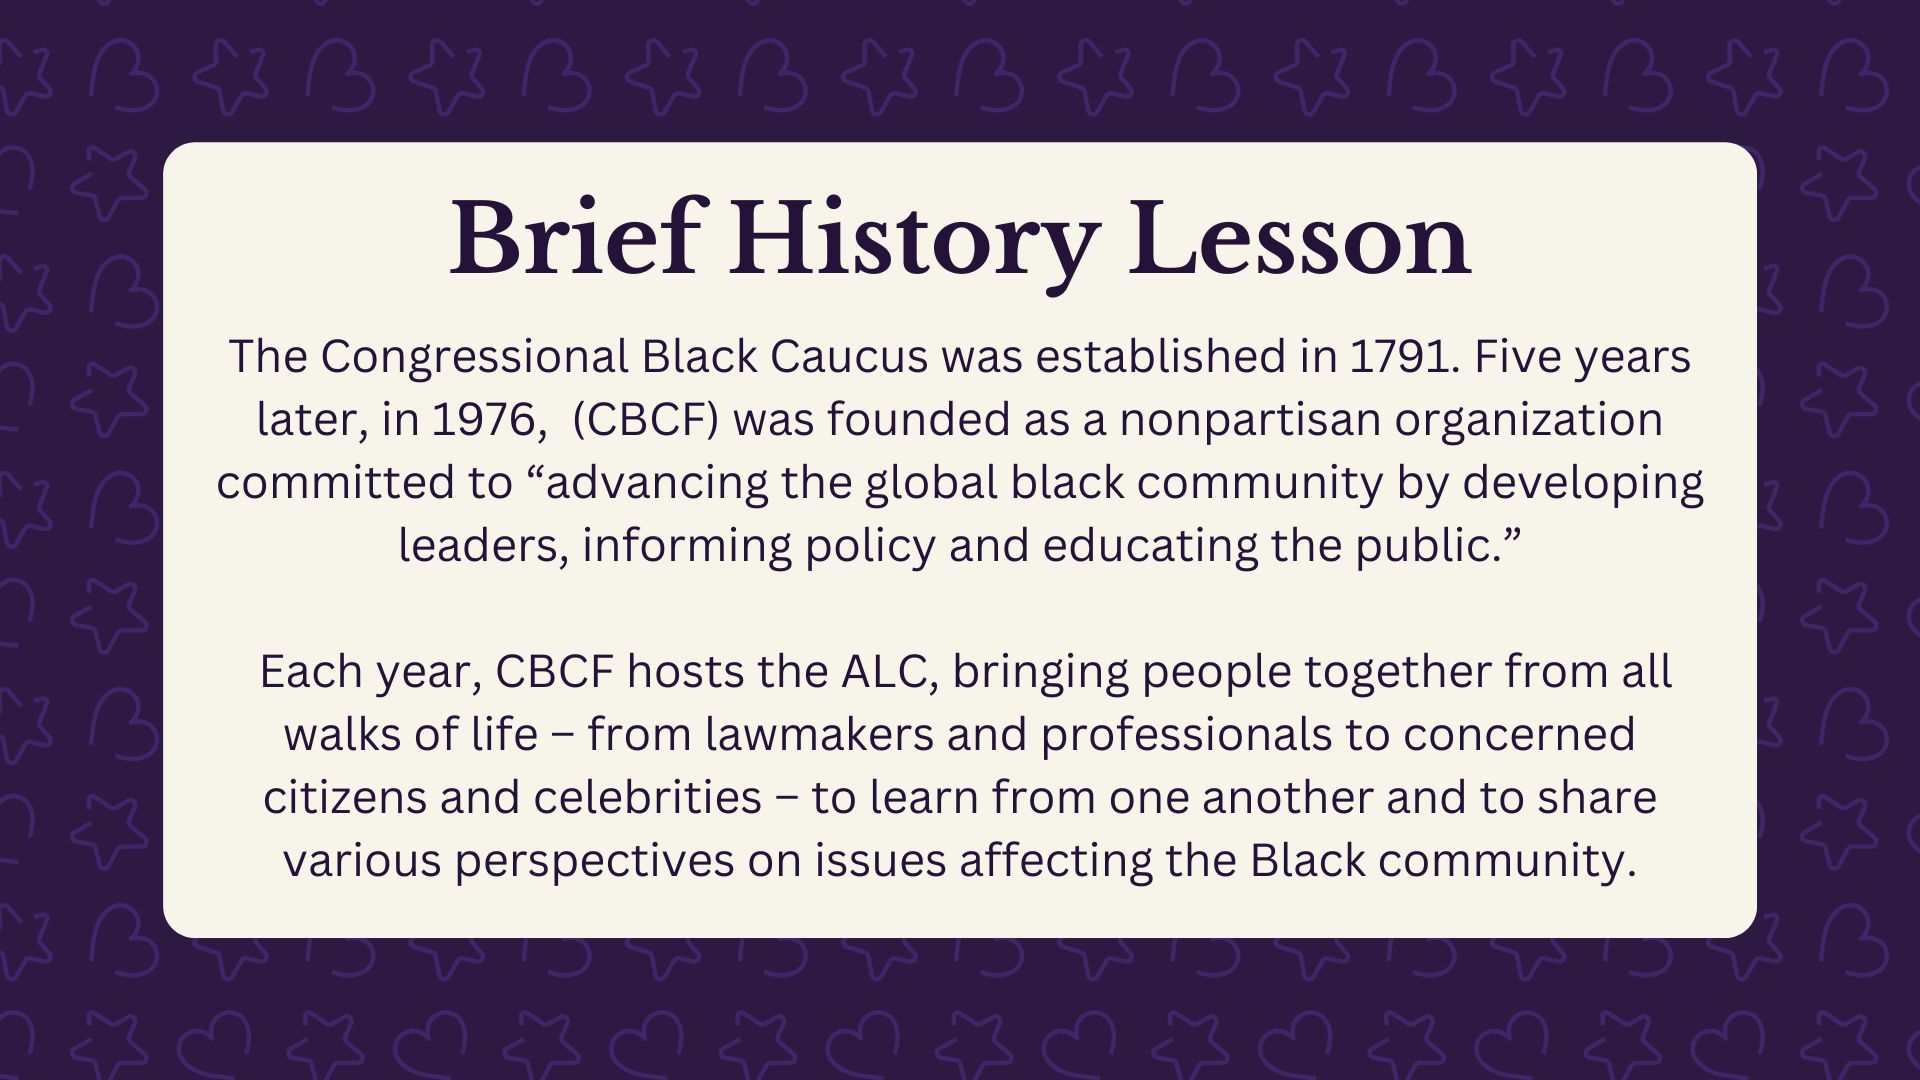 Brief history lesson:   The Congressional Black Caucus was established in 1791. Five years later, in 1976, the Congressional Black Caucus Foundation (CBCF) was founded as a nonpartisan organization committed to “advancing the global black community by developing leaders, informing policy and educating the public.” Each year, CBCF hosts the Annual Legislative Conference, bringing people together from all walks of life  – from lawmakers and professionals to concerned citizens and celebrities – to share and learn various perspectives on issues affecting the Black community. 